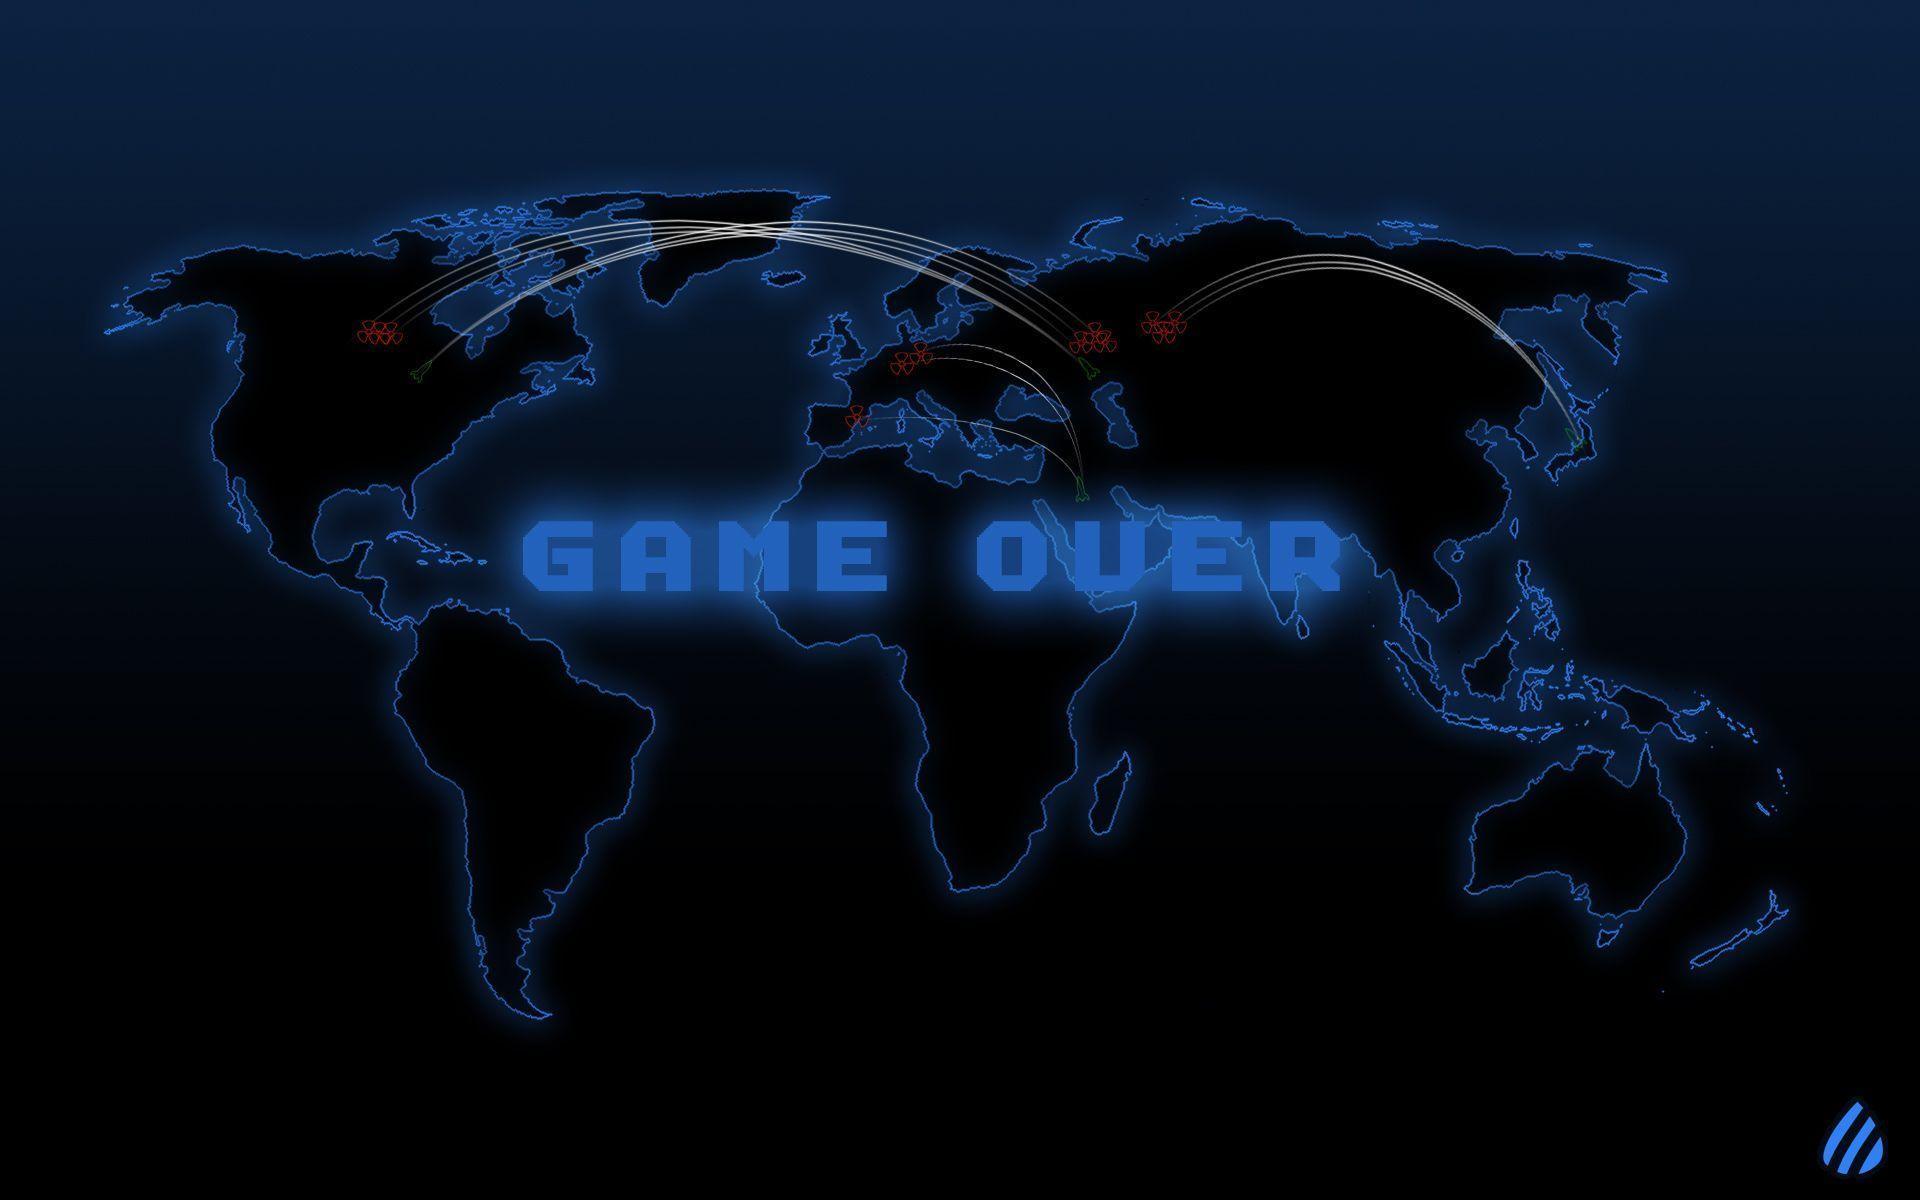 Game Over wallpaper